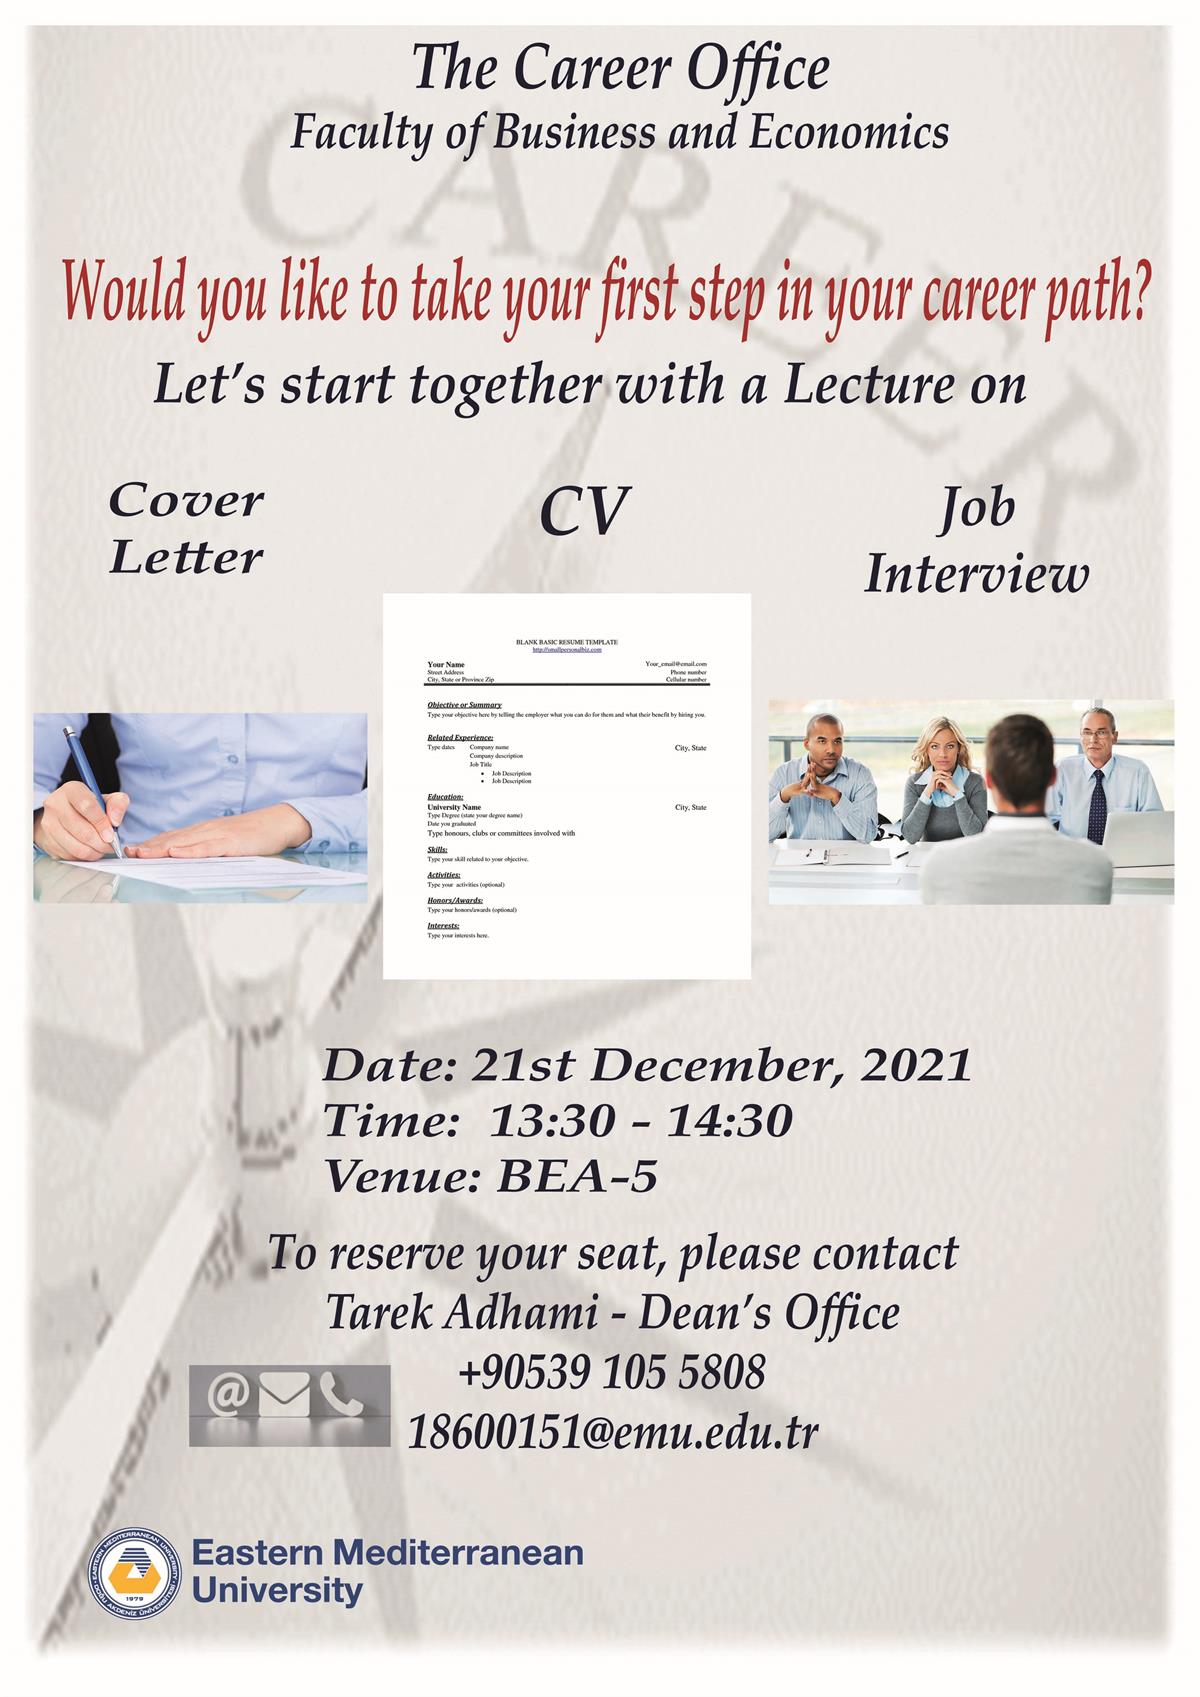 Lecture on CV, Cover letter, and Job Interview